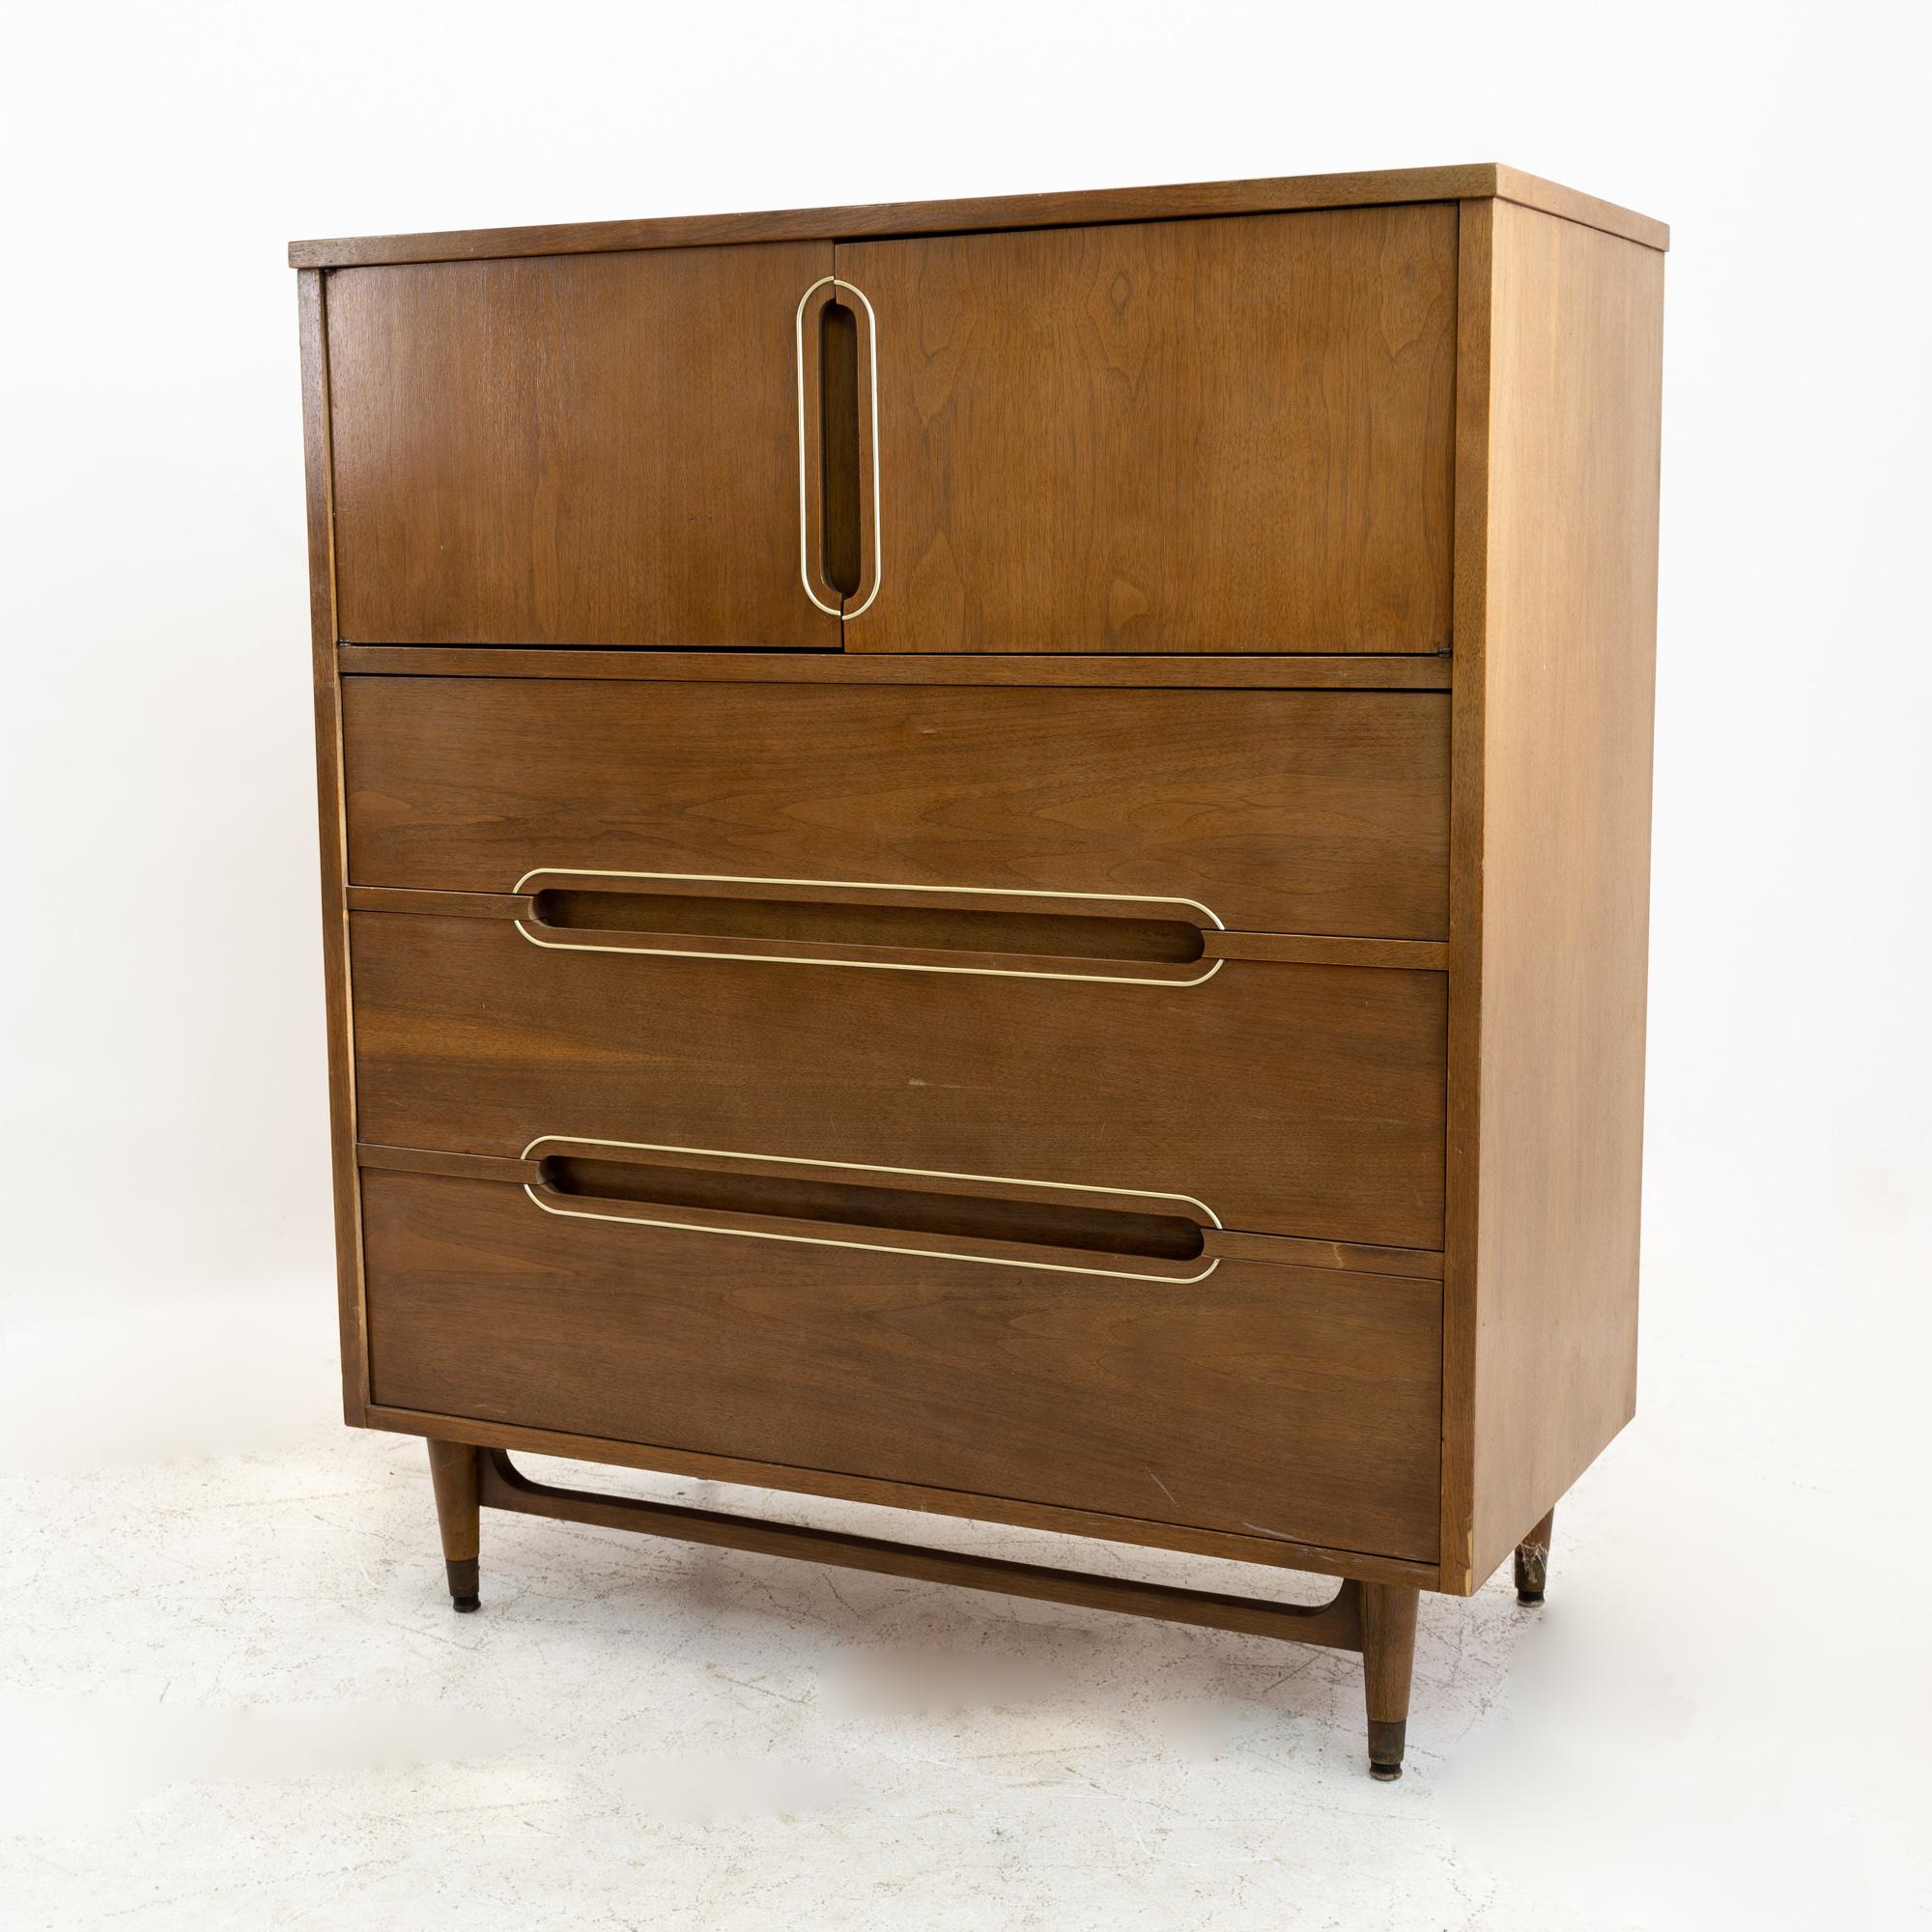 Kroehler mid century walnut & brass 5 drawer highboy dresser.
This dresser is 38.75 wide x 19 deep x 44.75 inches tall

All pieces of furniture can be had in what we call restored vintage condition. That means the piece is restored upon purchase